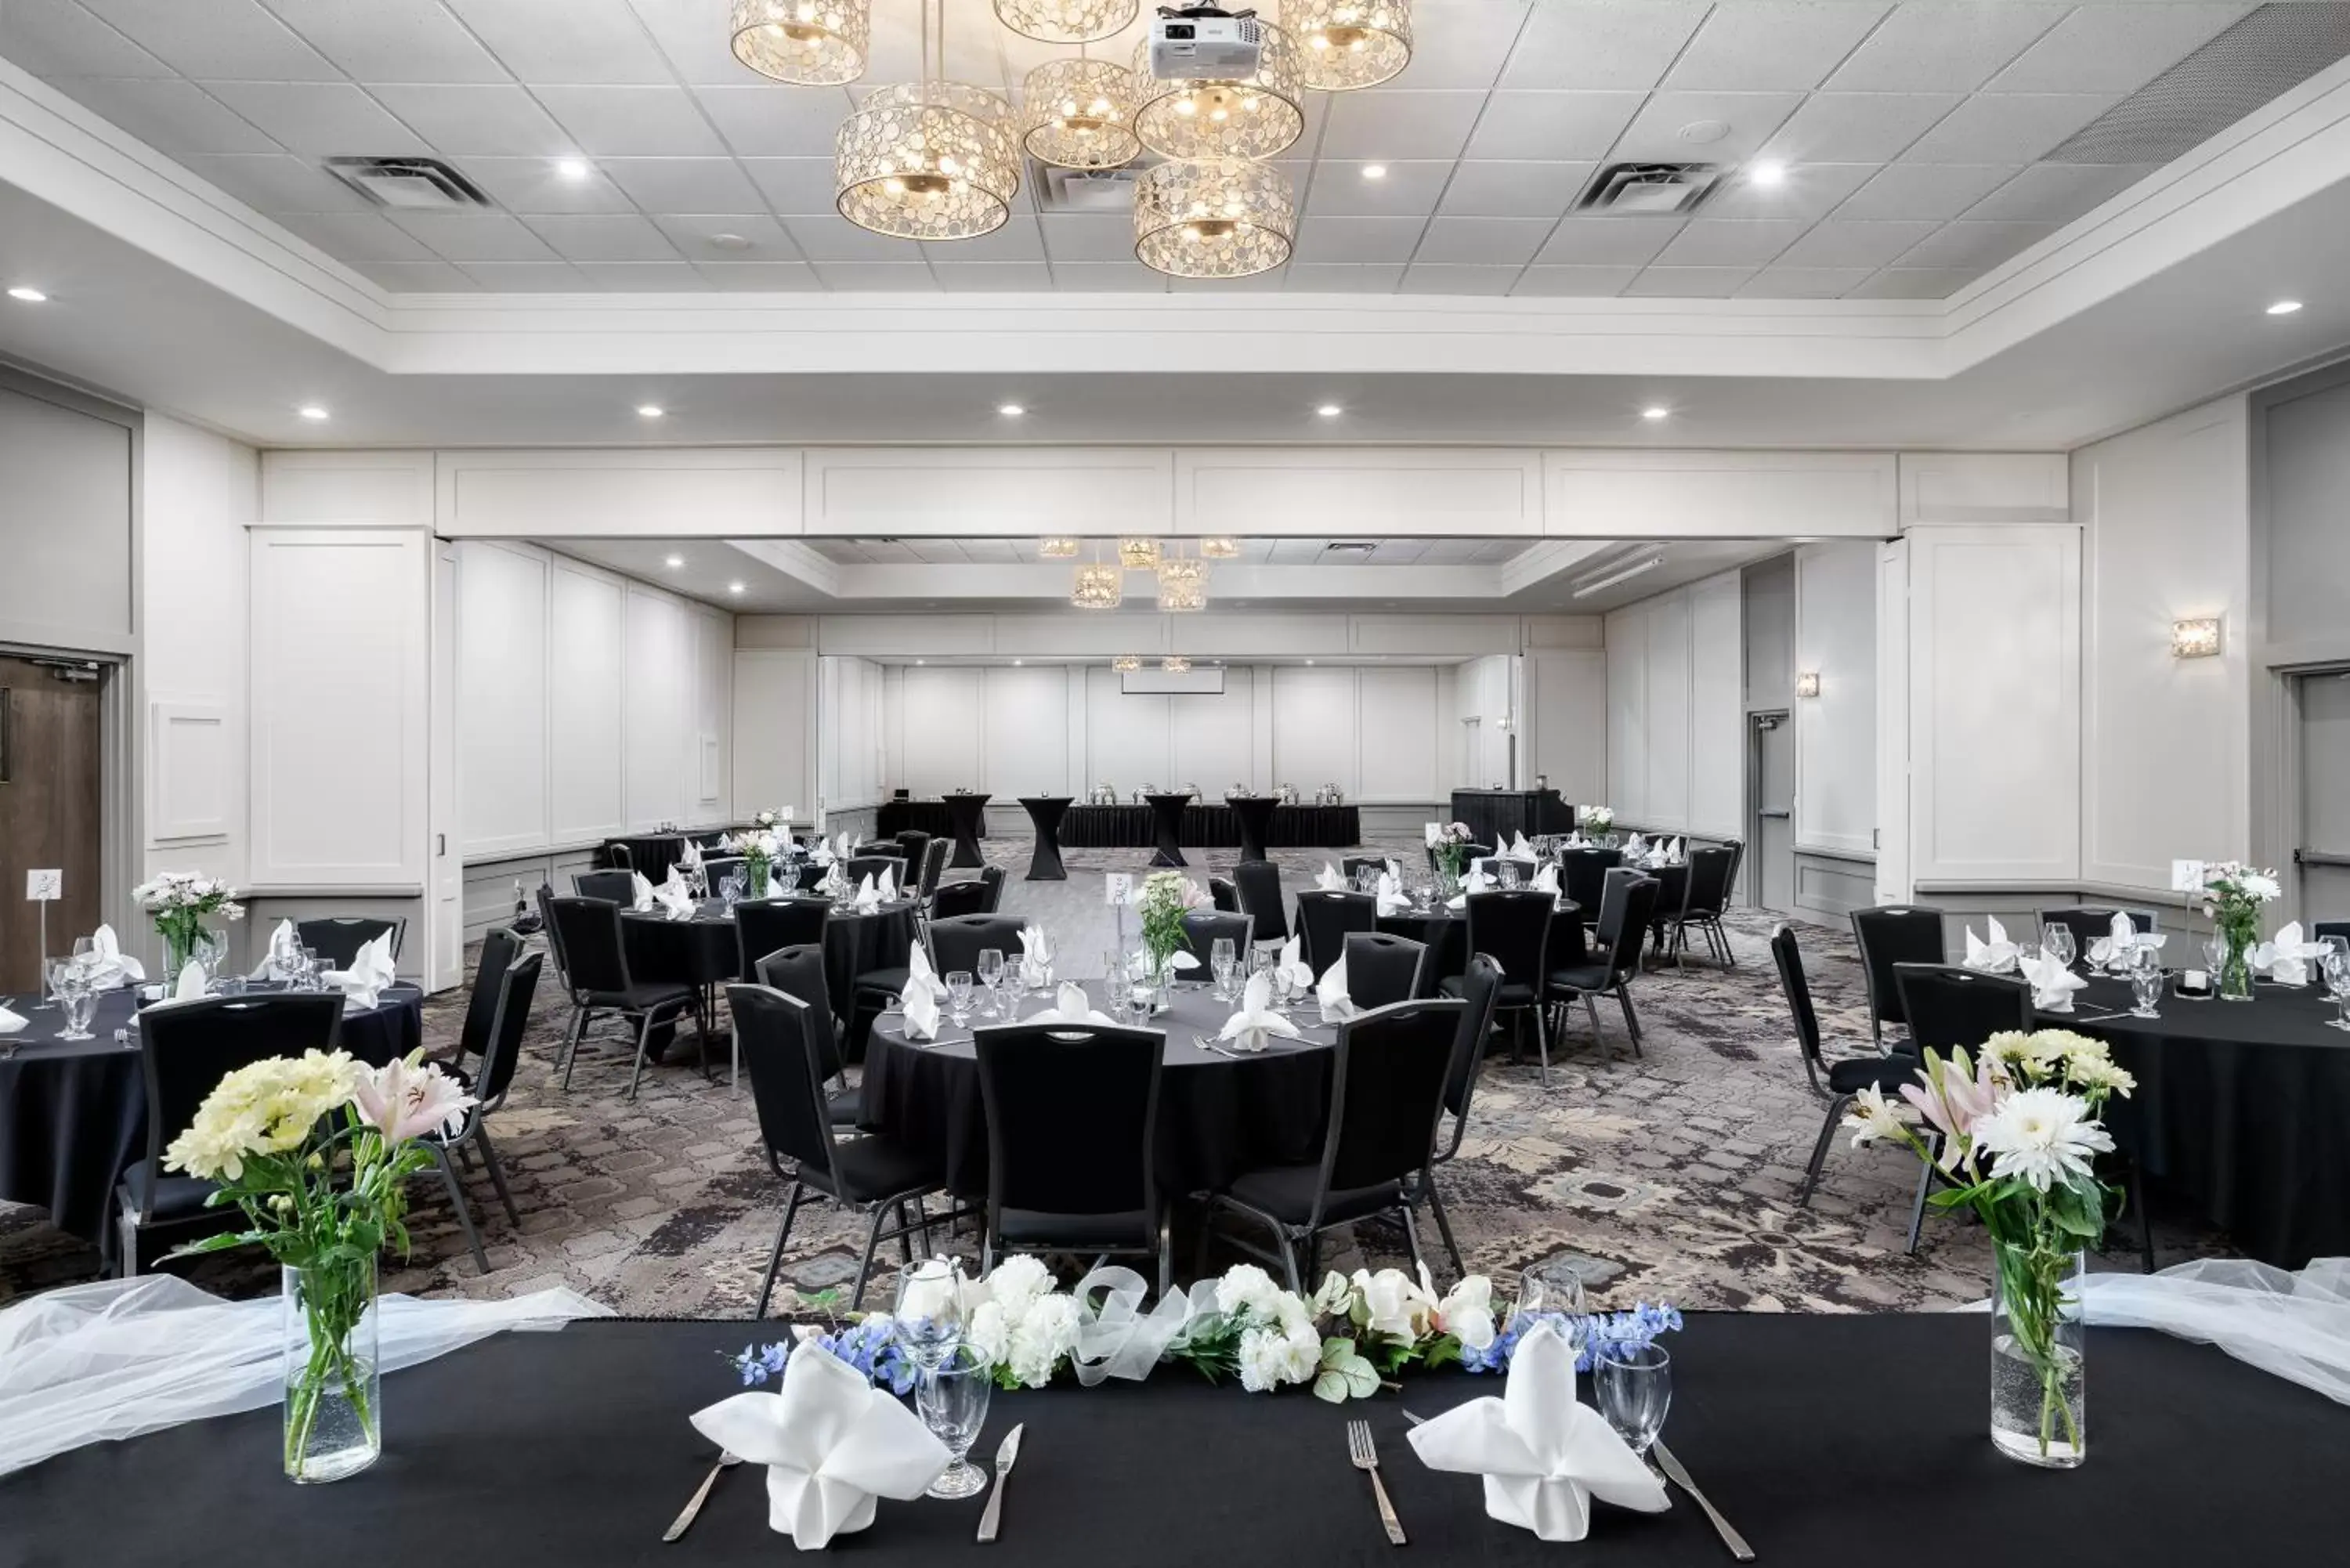 Banquet/Function facilities, Banquet Facilities in Prestige Rocky Mountain Resort Cranbrook, WorldHotels Crafted